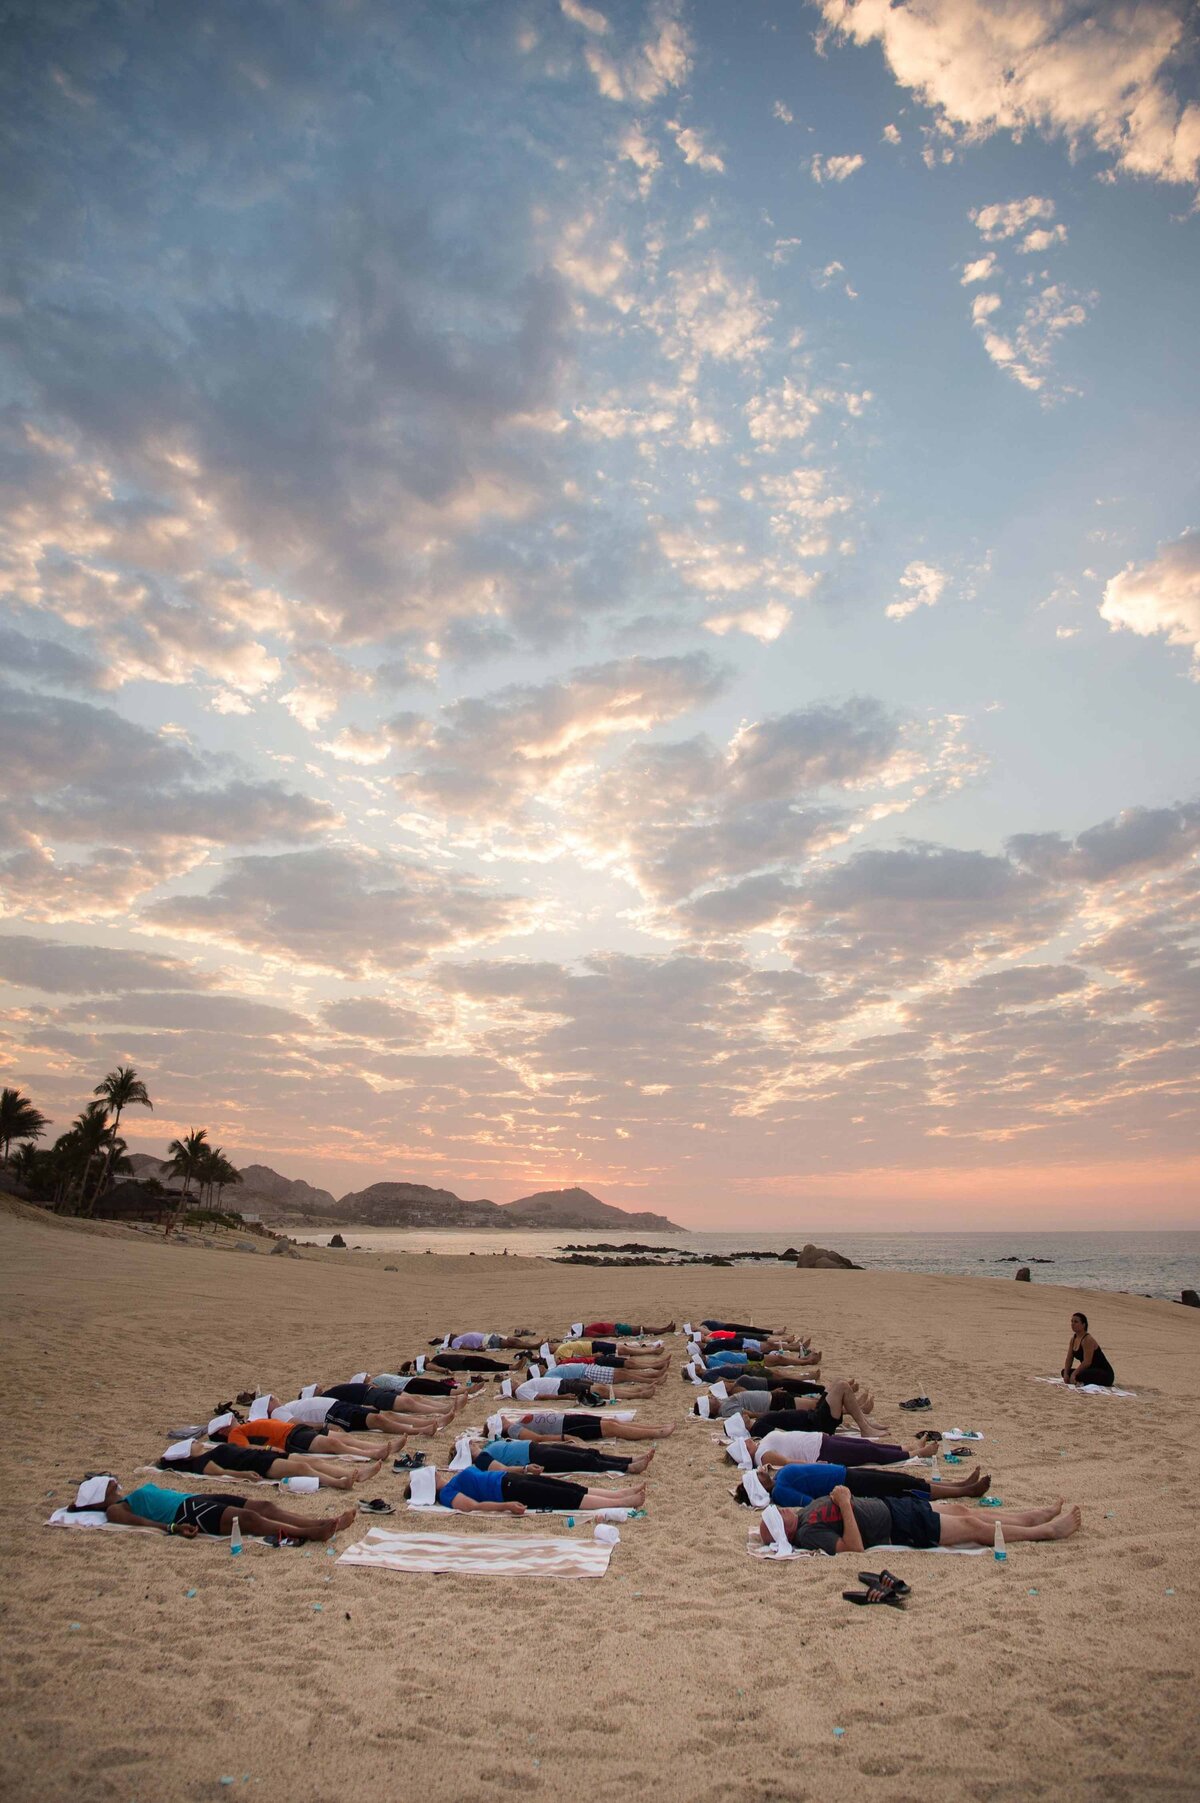 A yoga class offered as a relaxing beach activity for conference attendees